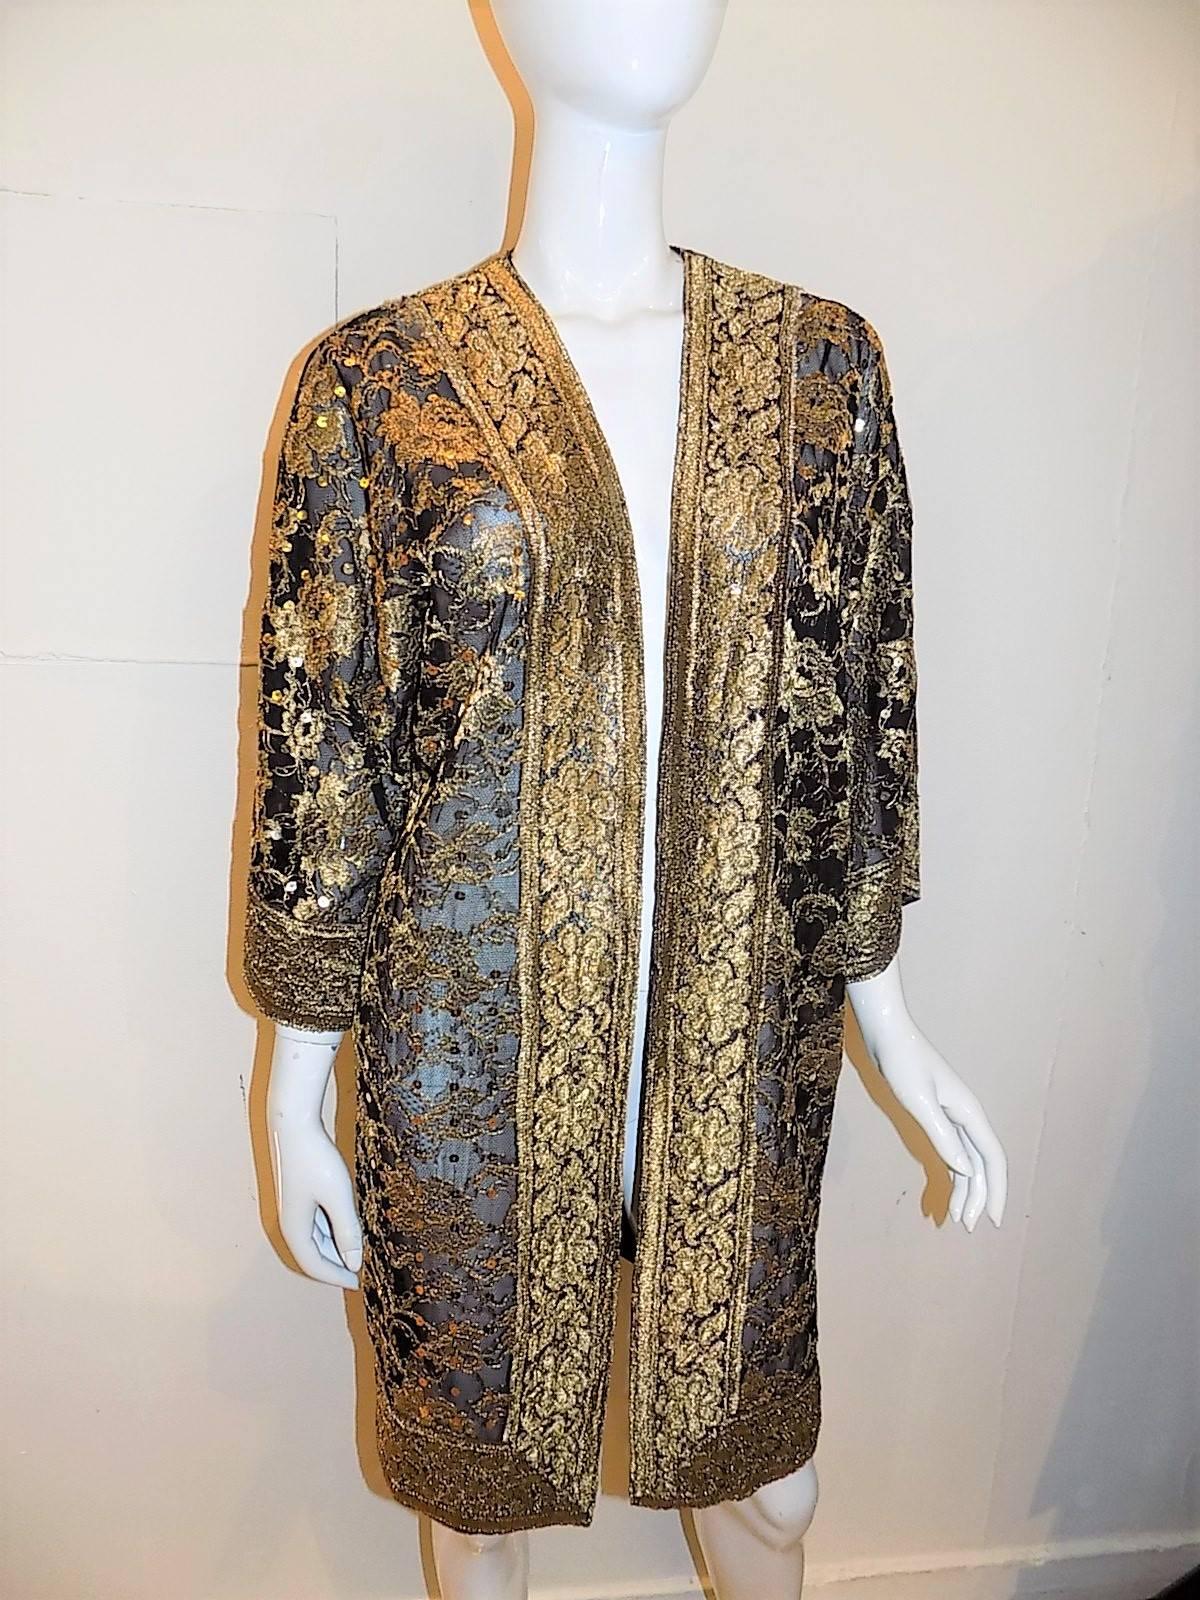 Spectacular Nolan Miller Couture Black and Gold Lace  long Evening Jacket / Coat. Delicate see trough lace with wide gold lace trim.  Entire coat is delicately  covered with gold sequence. Pristine condition. Like new. No signs of any Wear. Marked